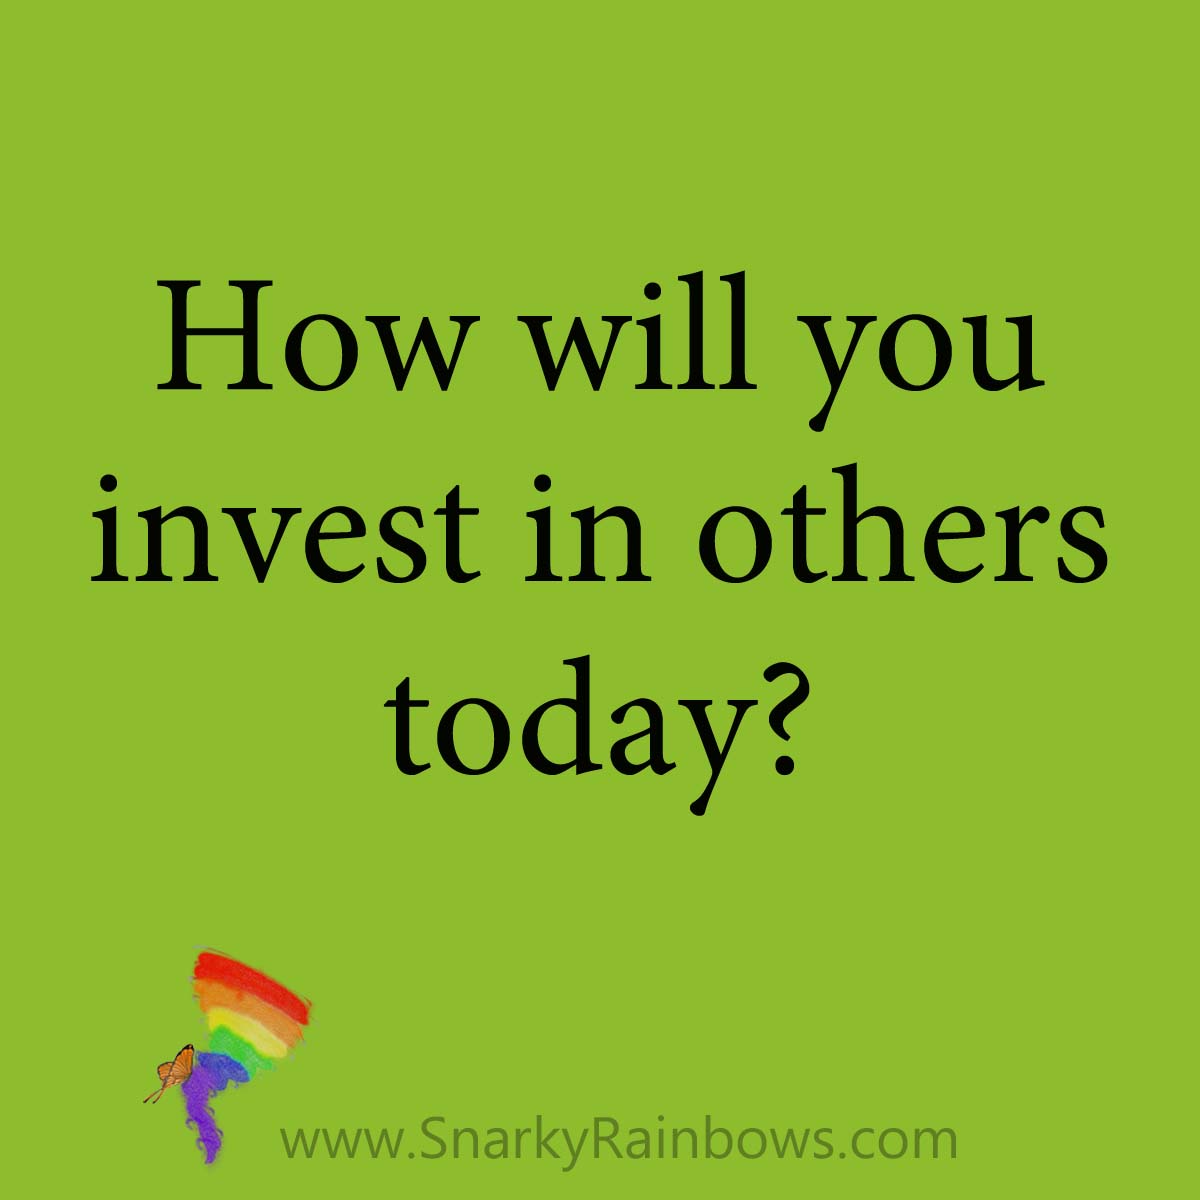 quote - invest in others